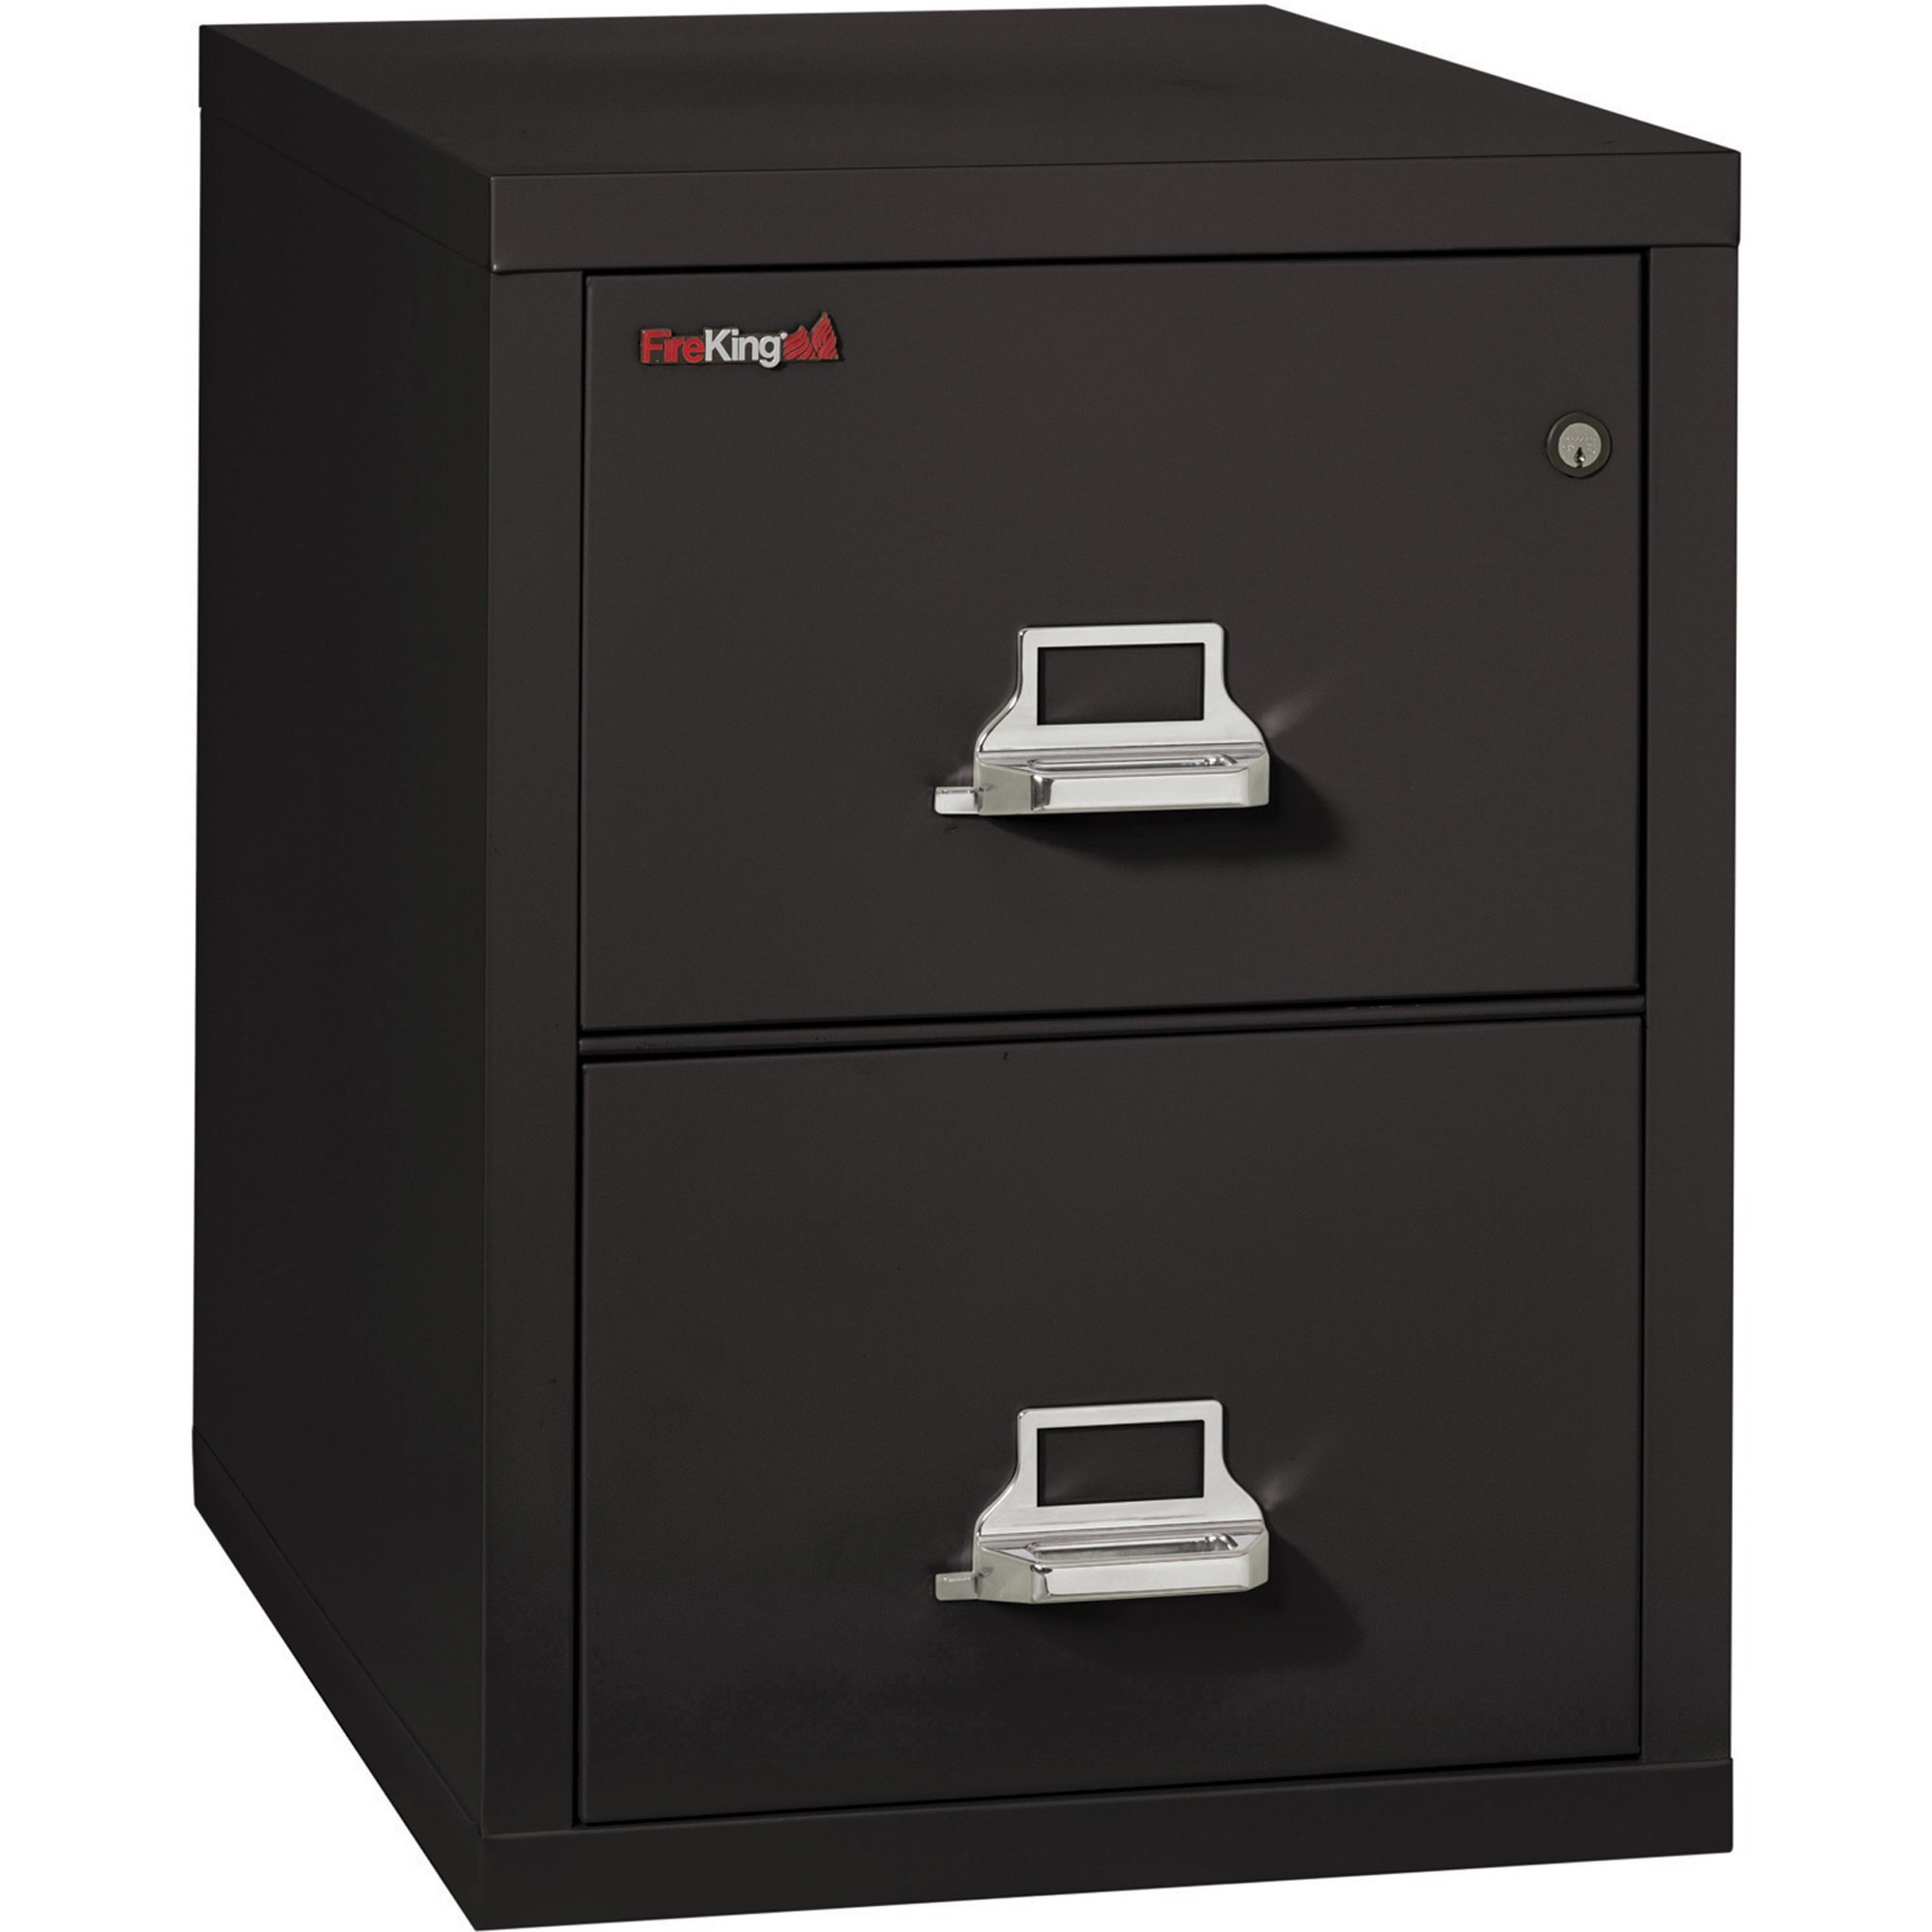 Fireking Insulated Two Drawer Vertical File Madill The Office